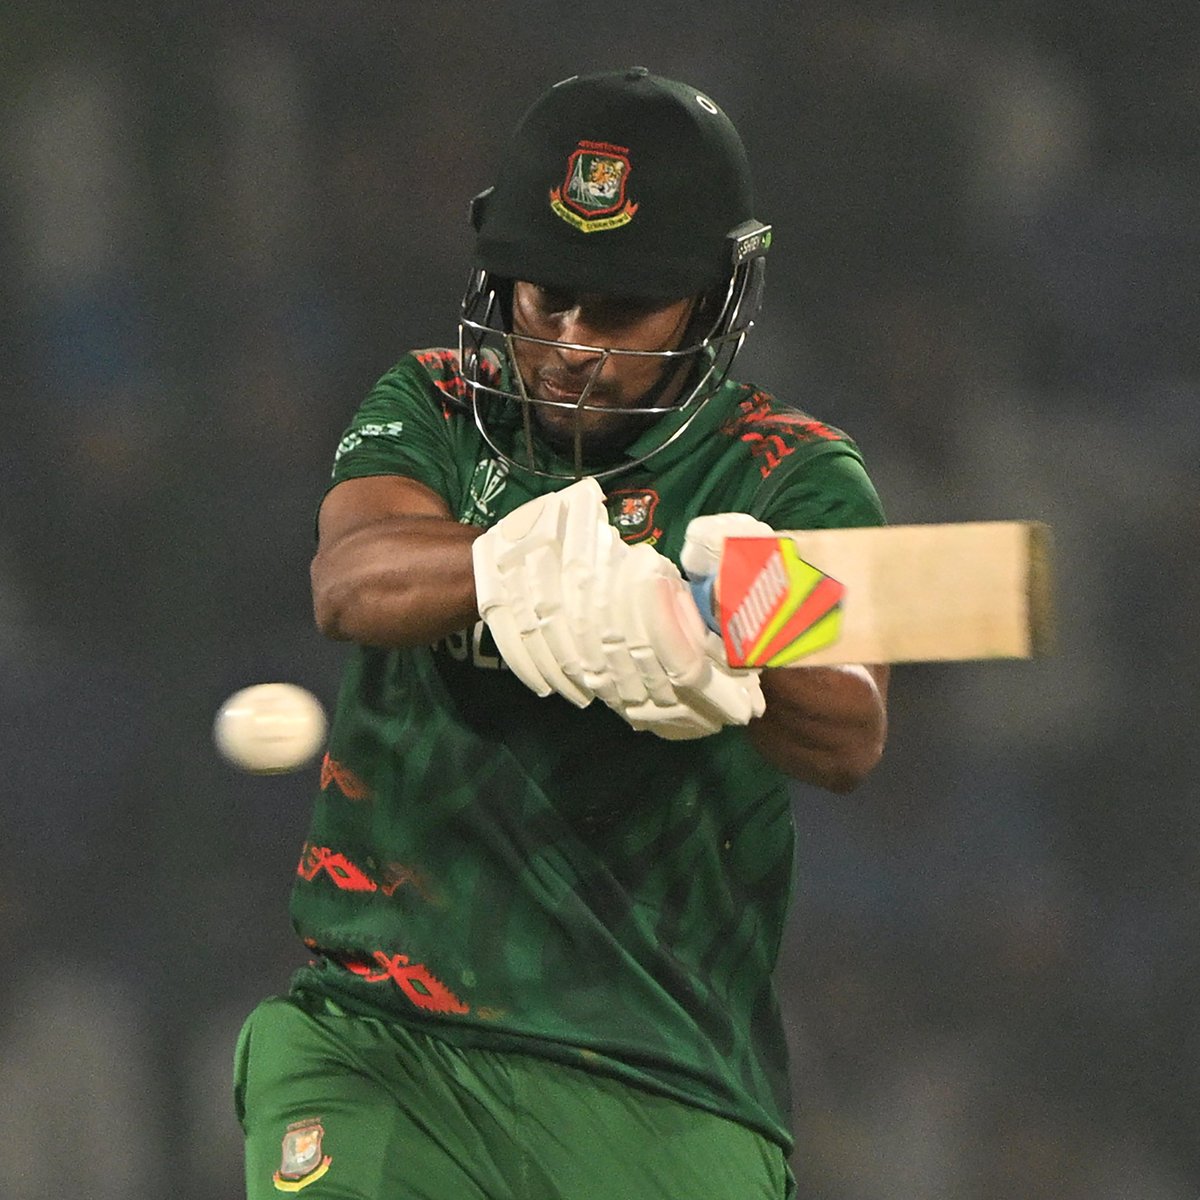 Today is the first time Bangladesh🇧🇩 beat Sri Lanka🇱🇰 in men's ICC events. 2003 - lost 2006 - lost 2007 (ODI) - lost 2007 (T20I) - lost 2015 - lost 2019 - lost 2021 - lost 2023 - WON #CWC2023 #BANvSL